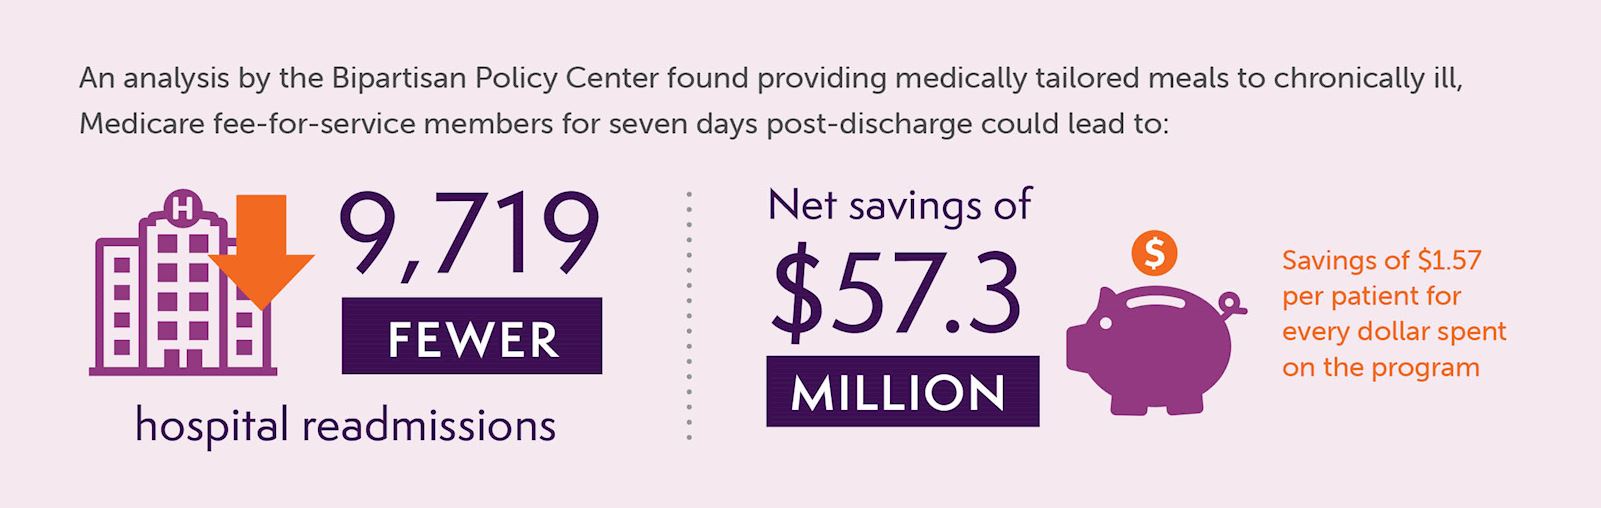 Infographic analysis of hospital readmissions and net savings